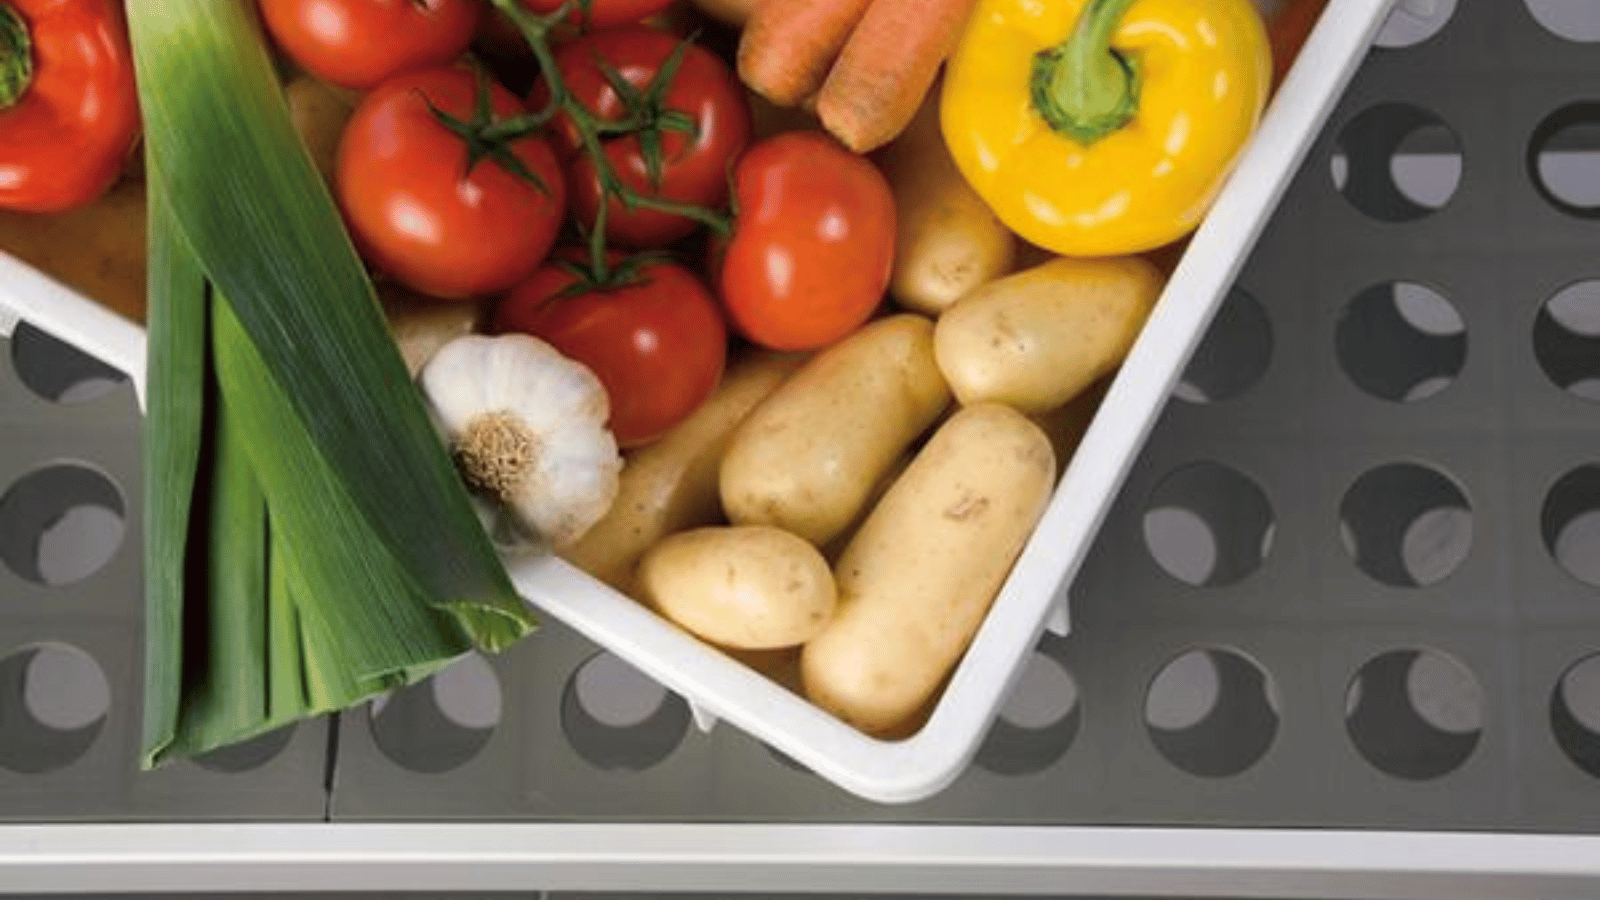 White bin filled with leeks, garlic, potatoes, tomatoes, yellow pepper, and carrots on top of FERMOD shelving